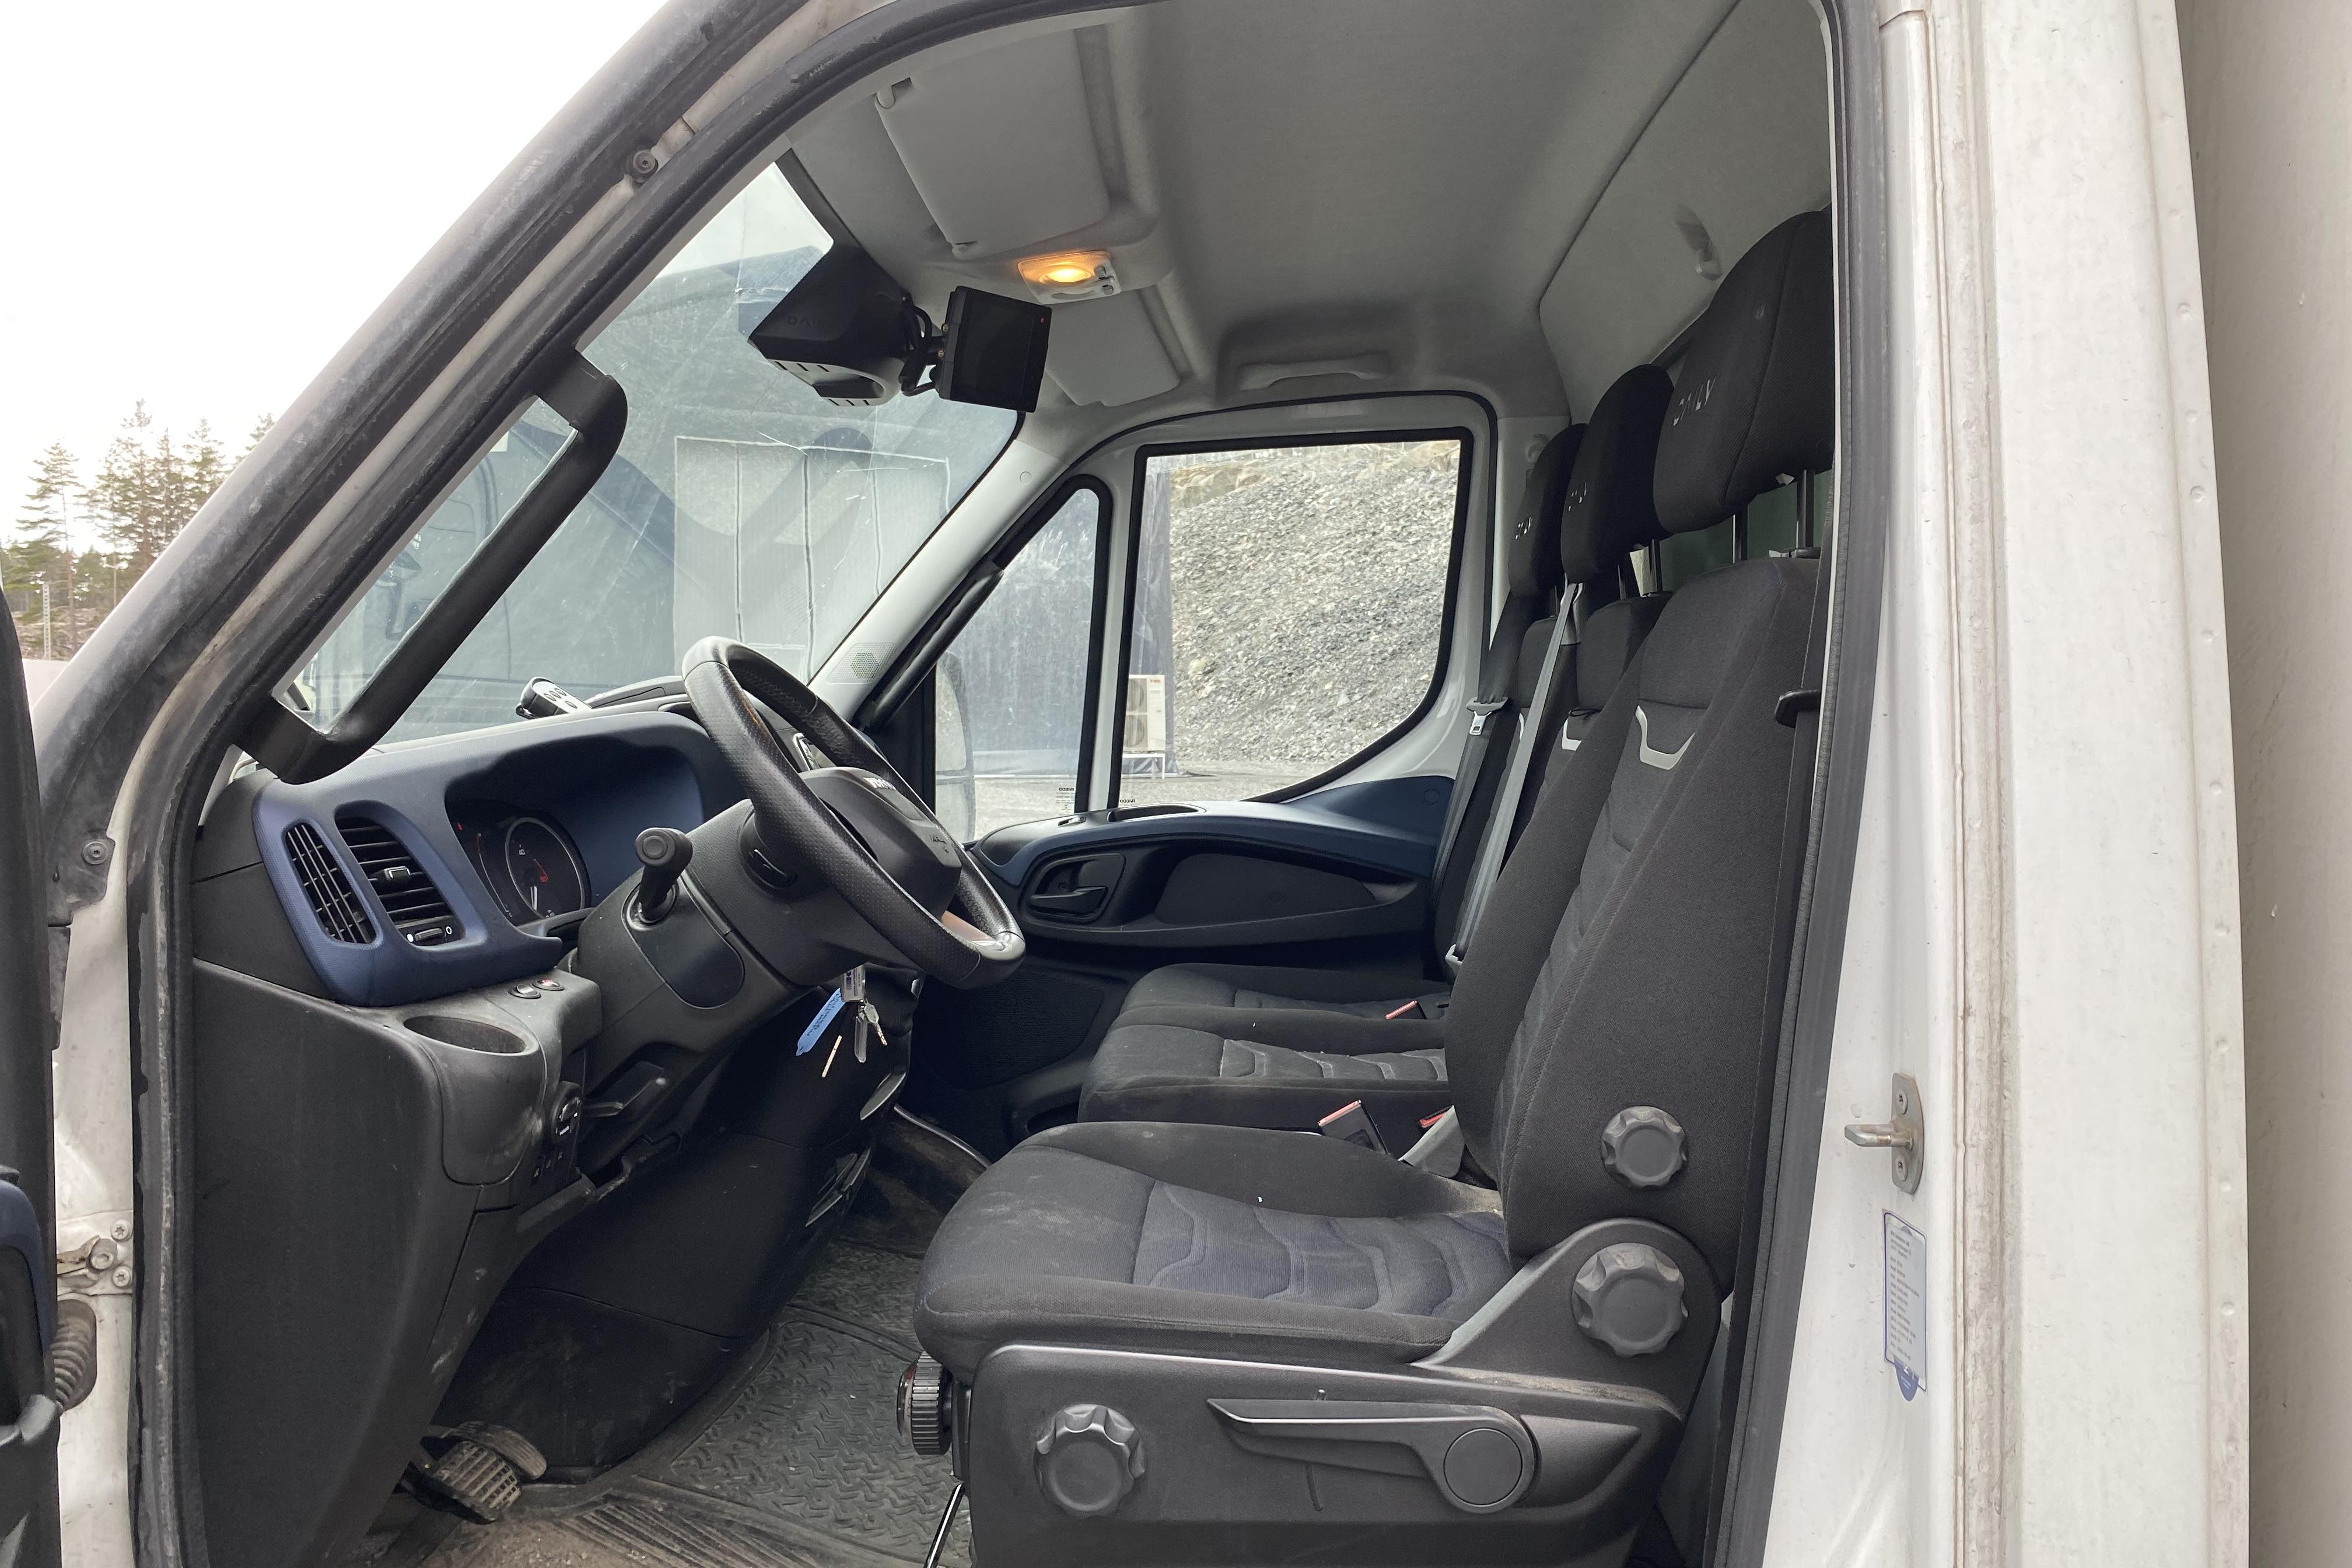 Iveco DAILY - 81 611 km - Automatic - white - 2021